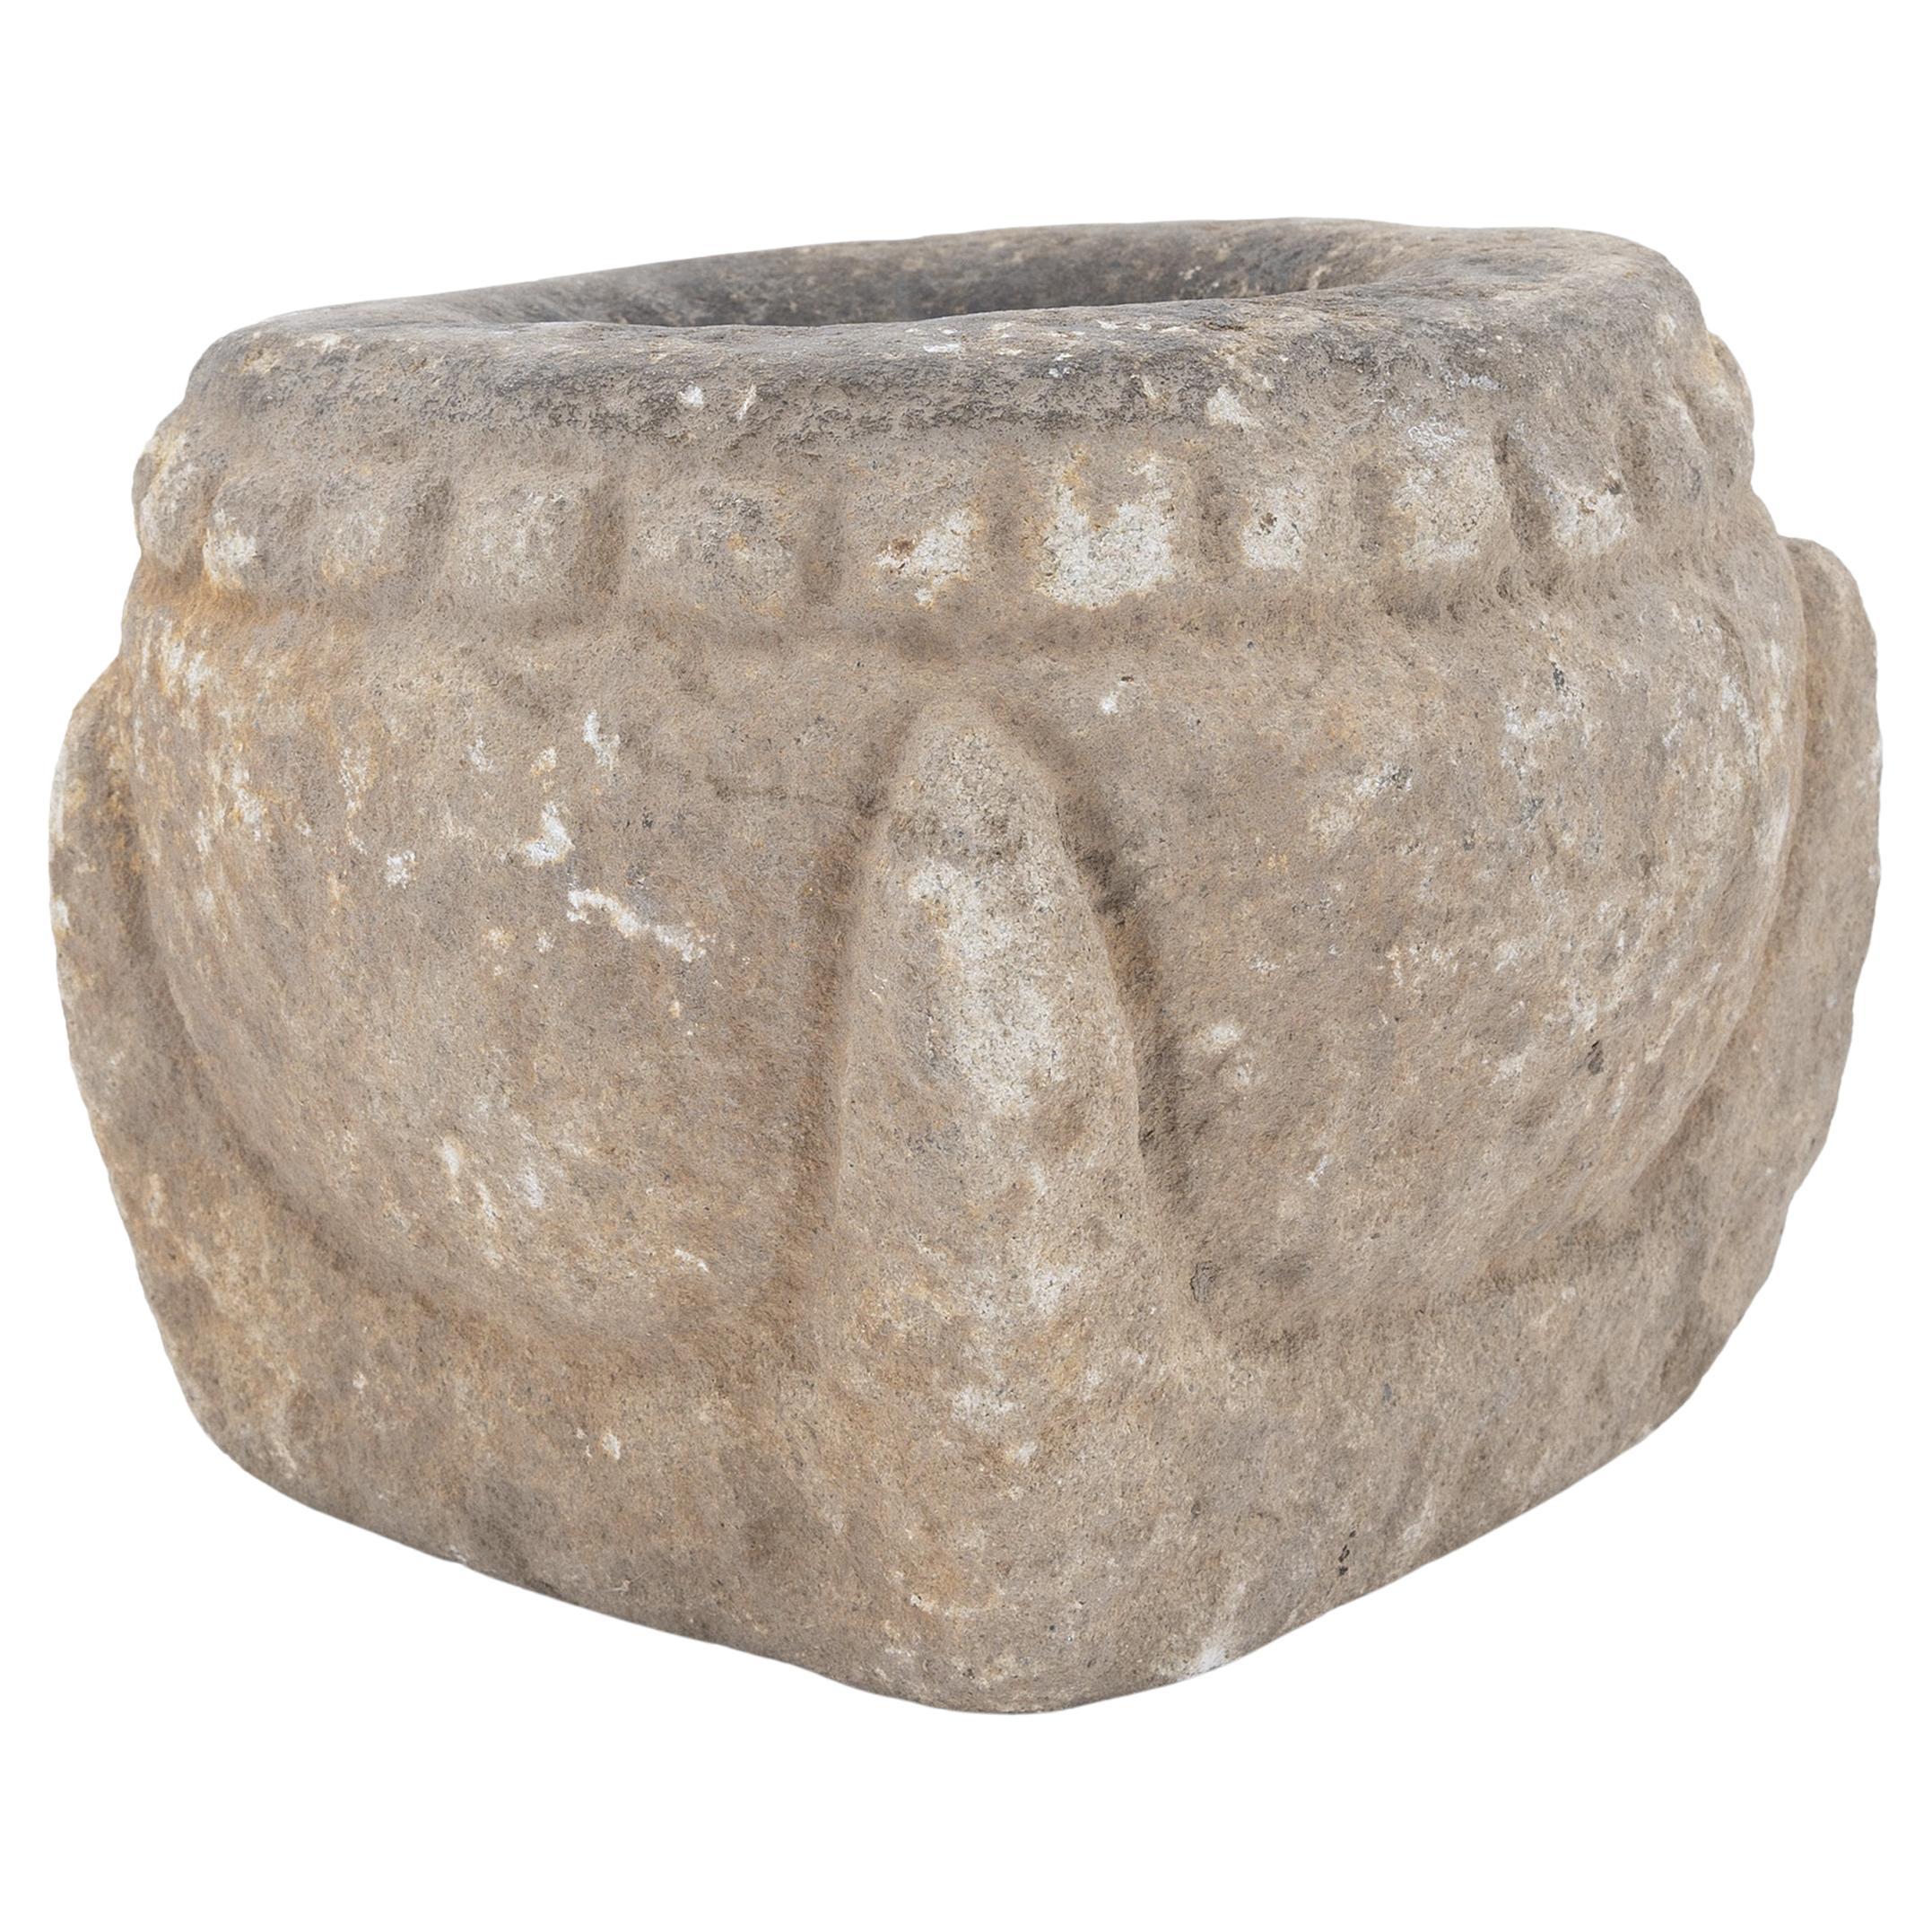 Chinese Studded Stone Mortar, c. 1900